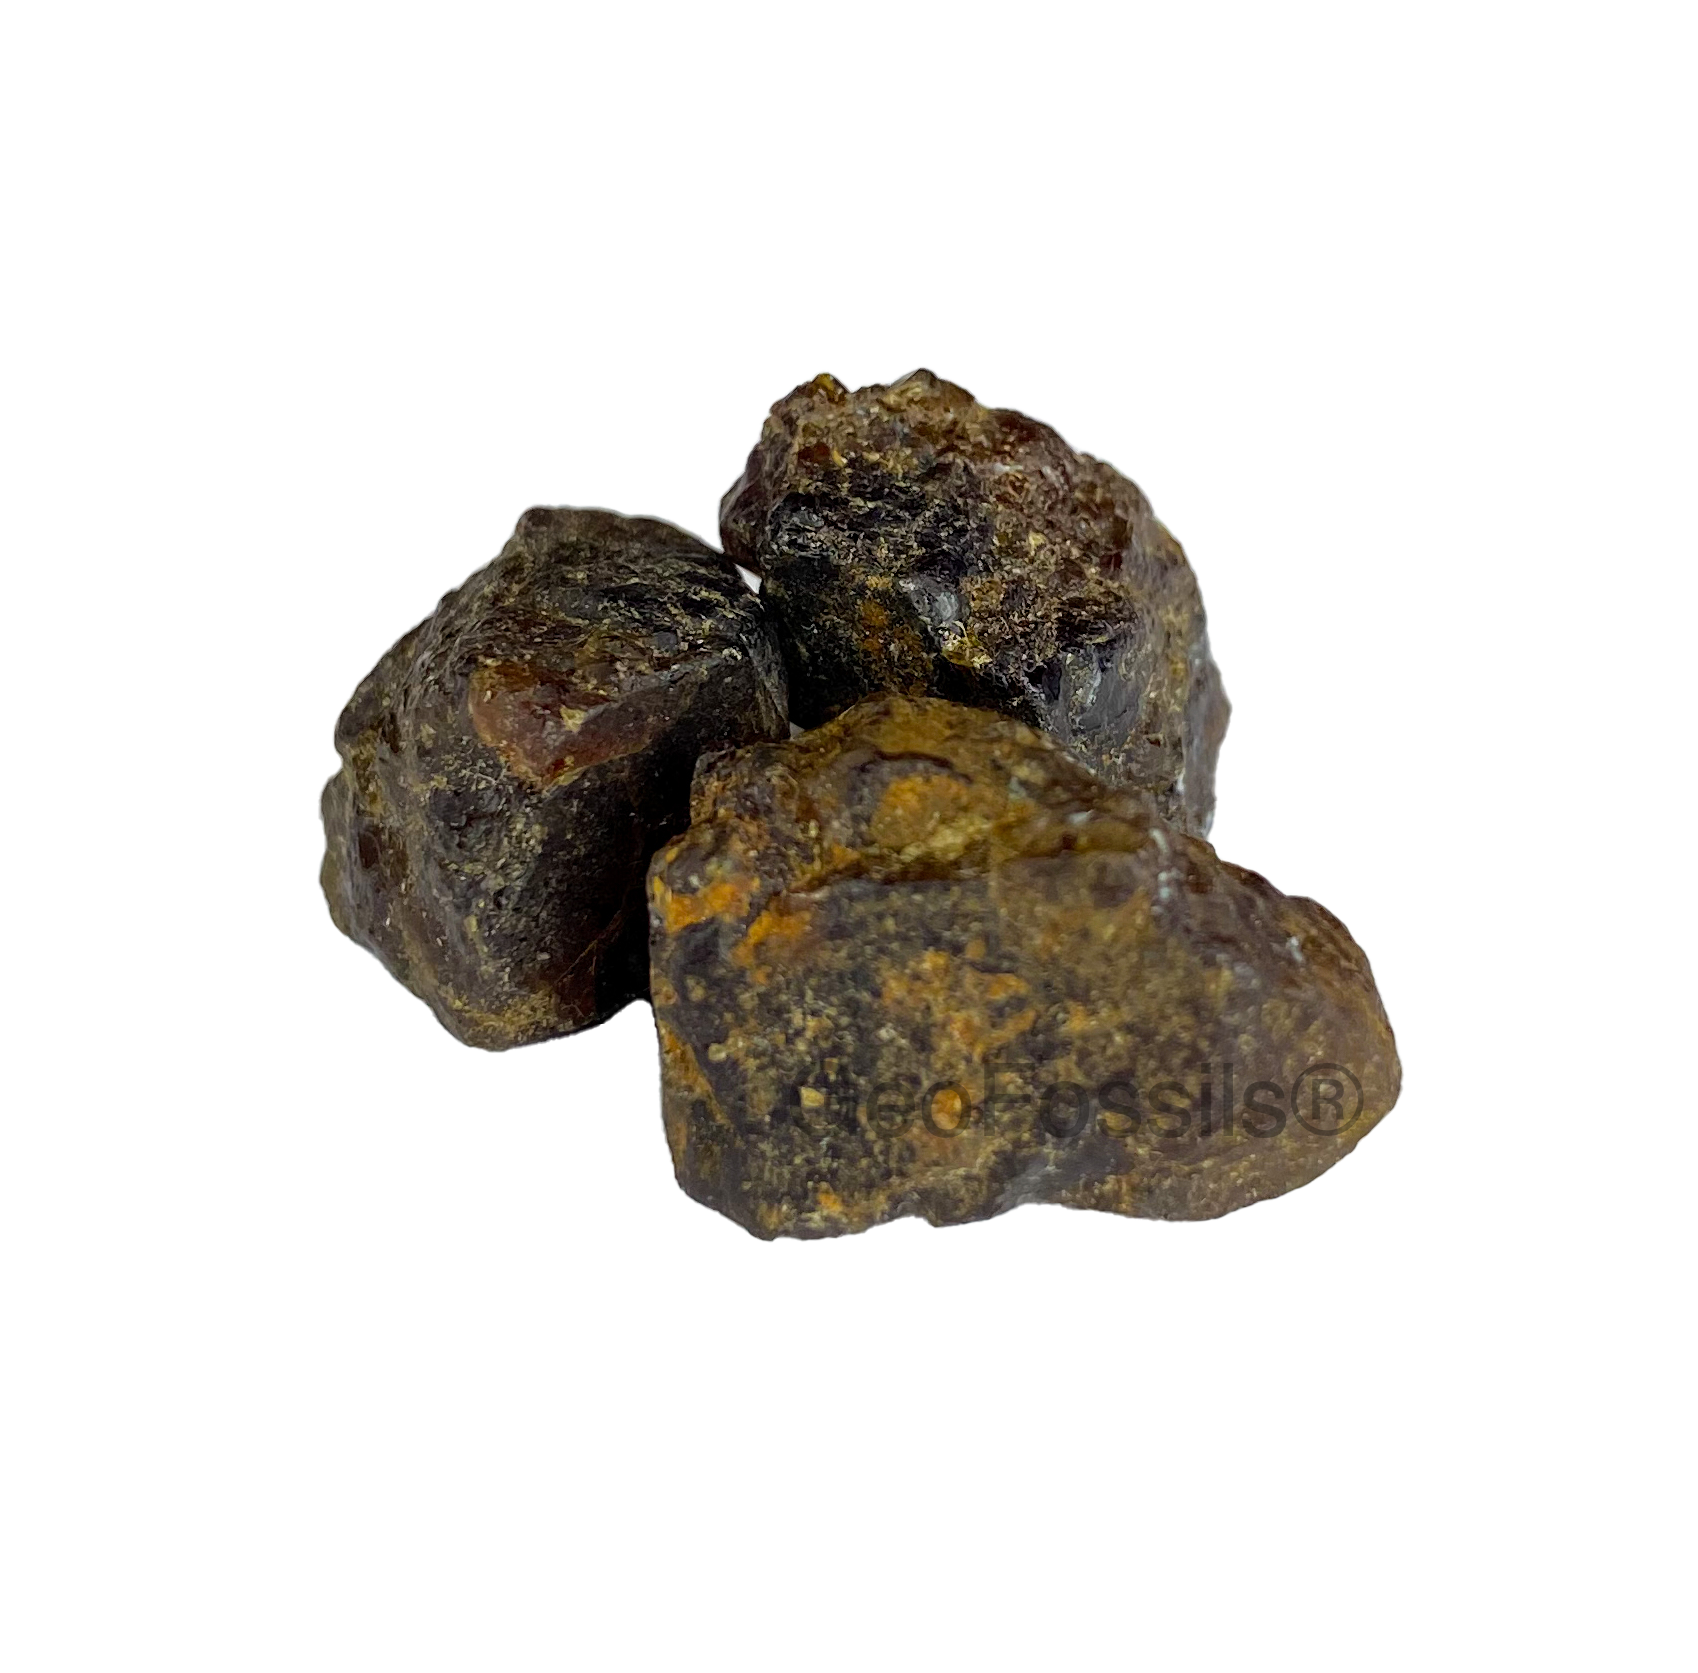 Geofossils Rare Earth Element - Bastnasite 2gms approx